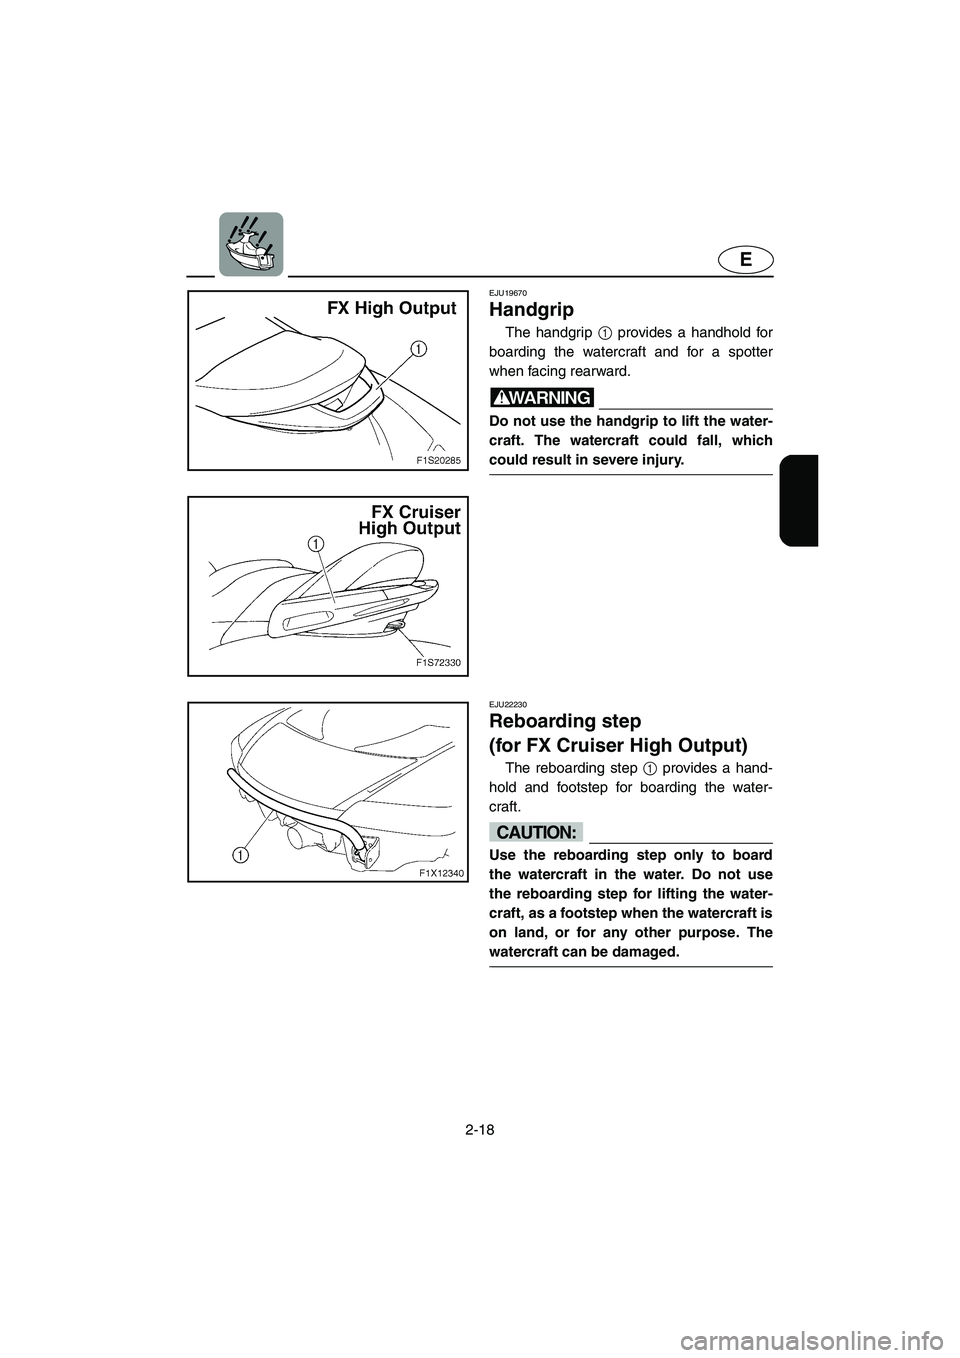 YAMAHA FX HO CRUISER 2006 Service Manual 2-18
E
EJU19670 
Handgrip 
The handgrip 1 provides a handhold for
boarding the watercraft and for a spotter
when facing rearward.
WARNING@ Do not use the handgrip to lift the water-
craft. The watercr